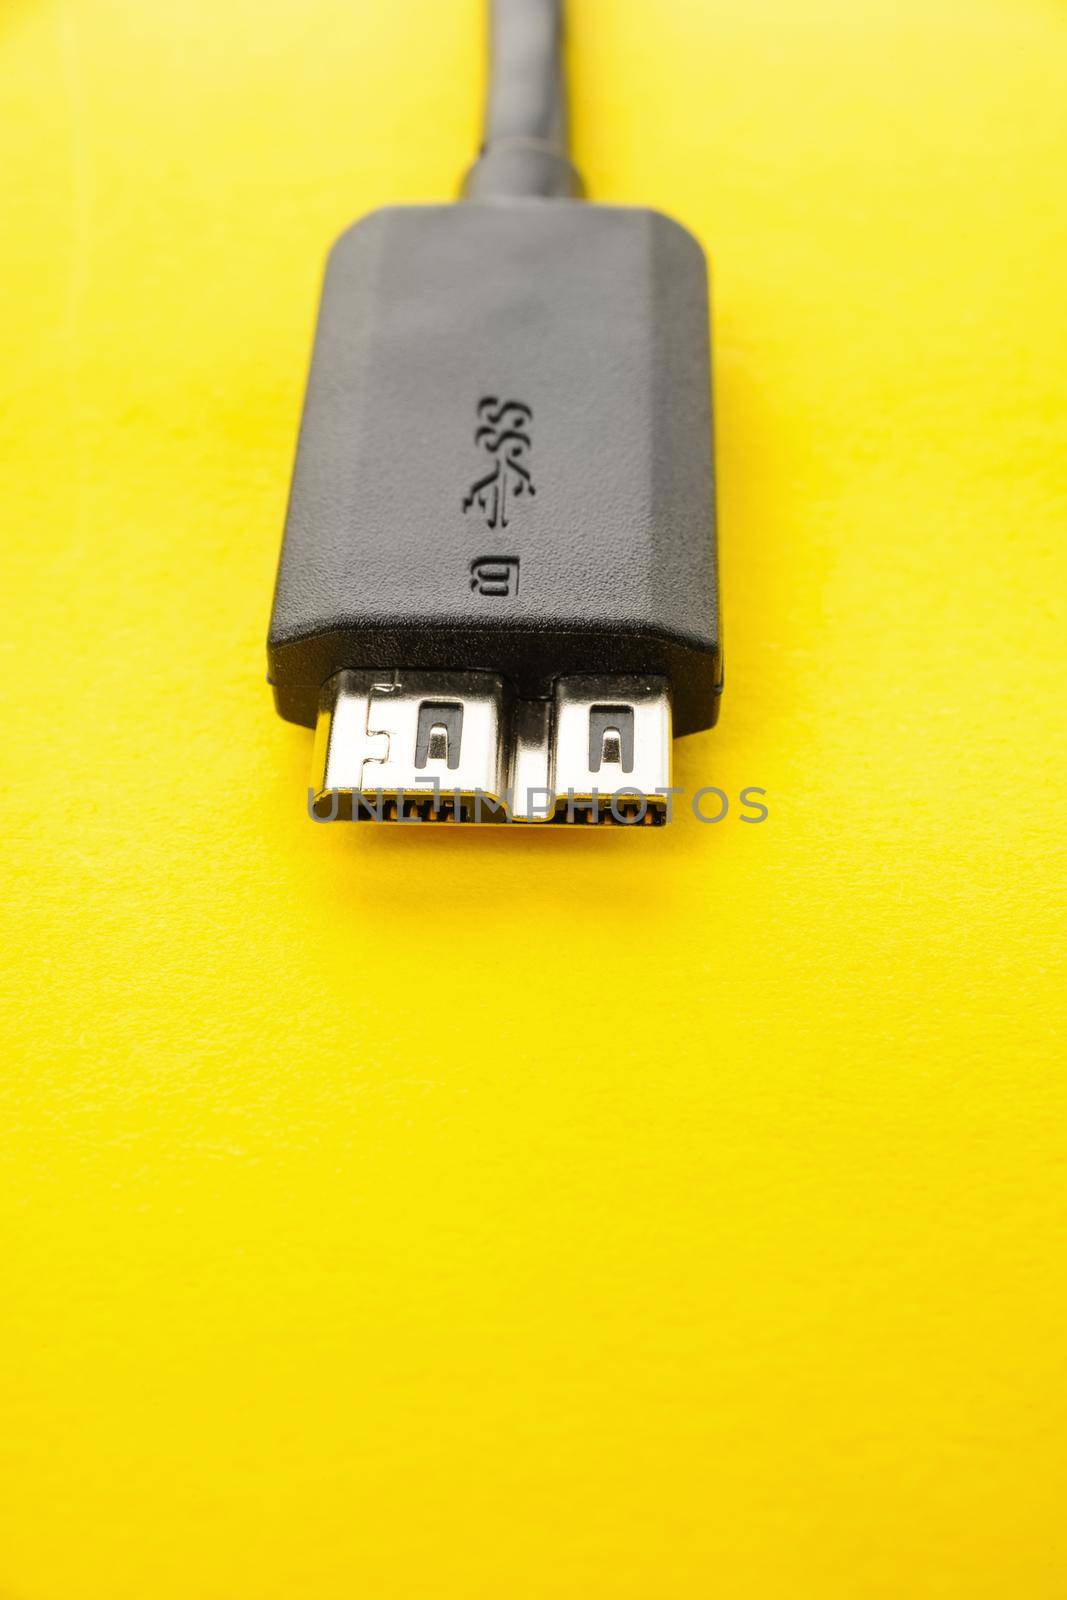 closeup detail of USB 3.0 connector on yellow paper